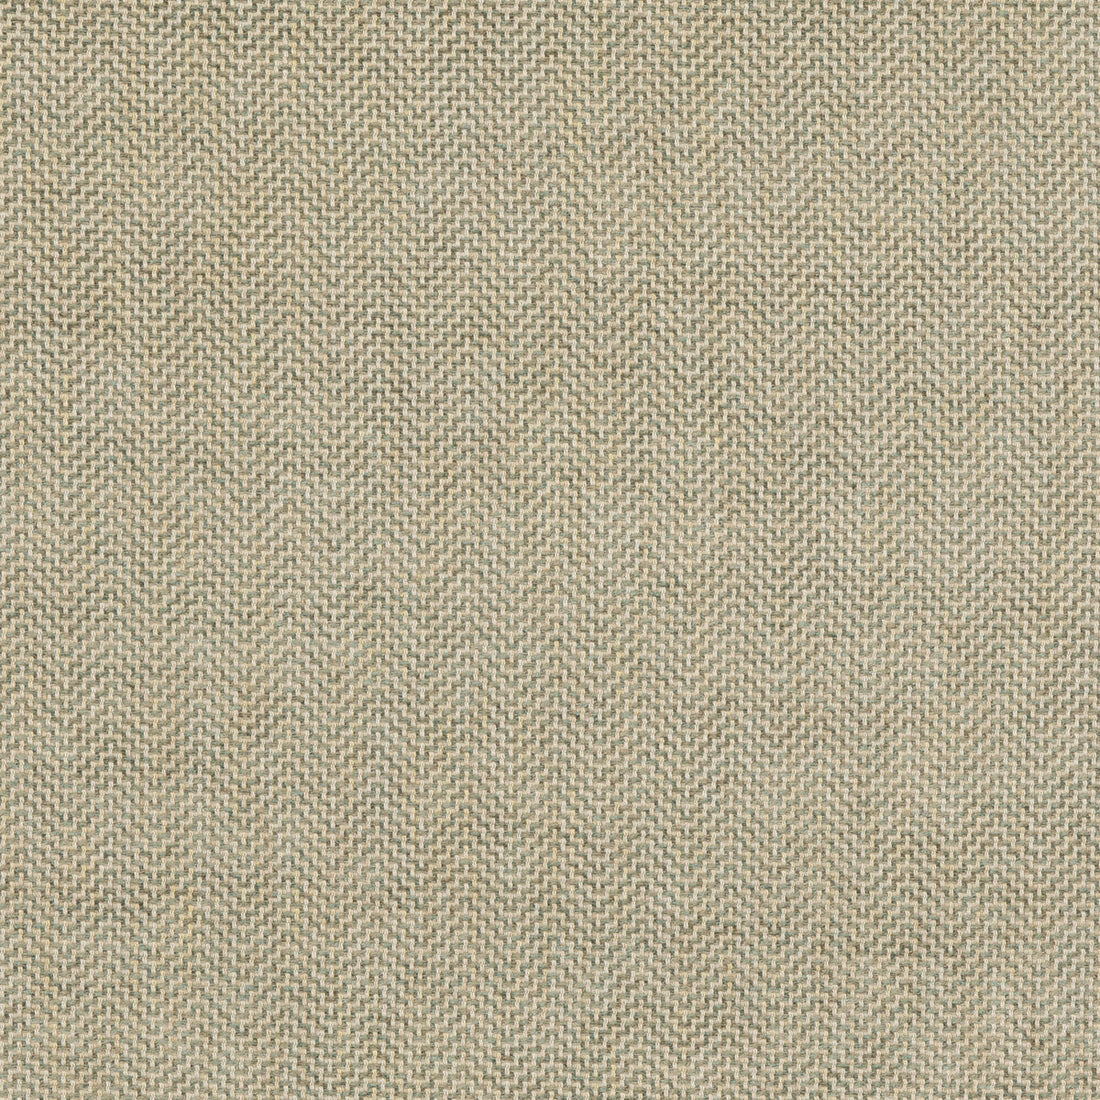 Glanville fabric in mineral color - pattern BF10873.705.0 - by G P &amp; J Baker in the Essential Colours II collection